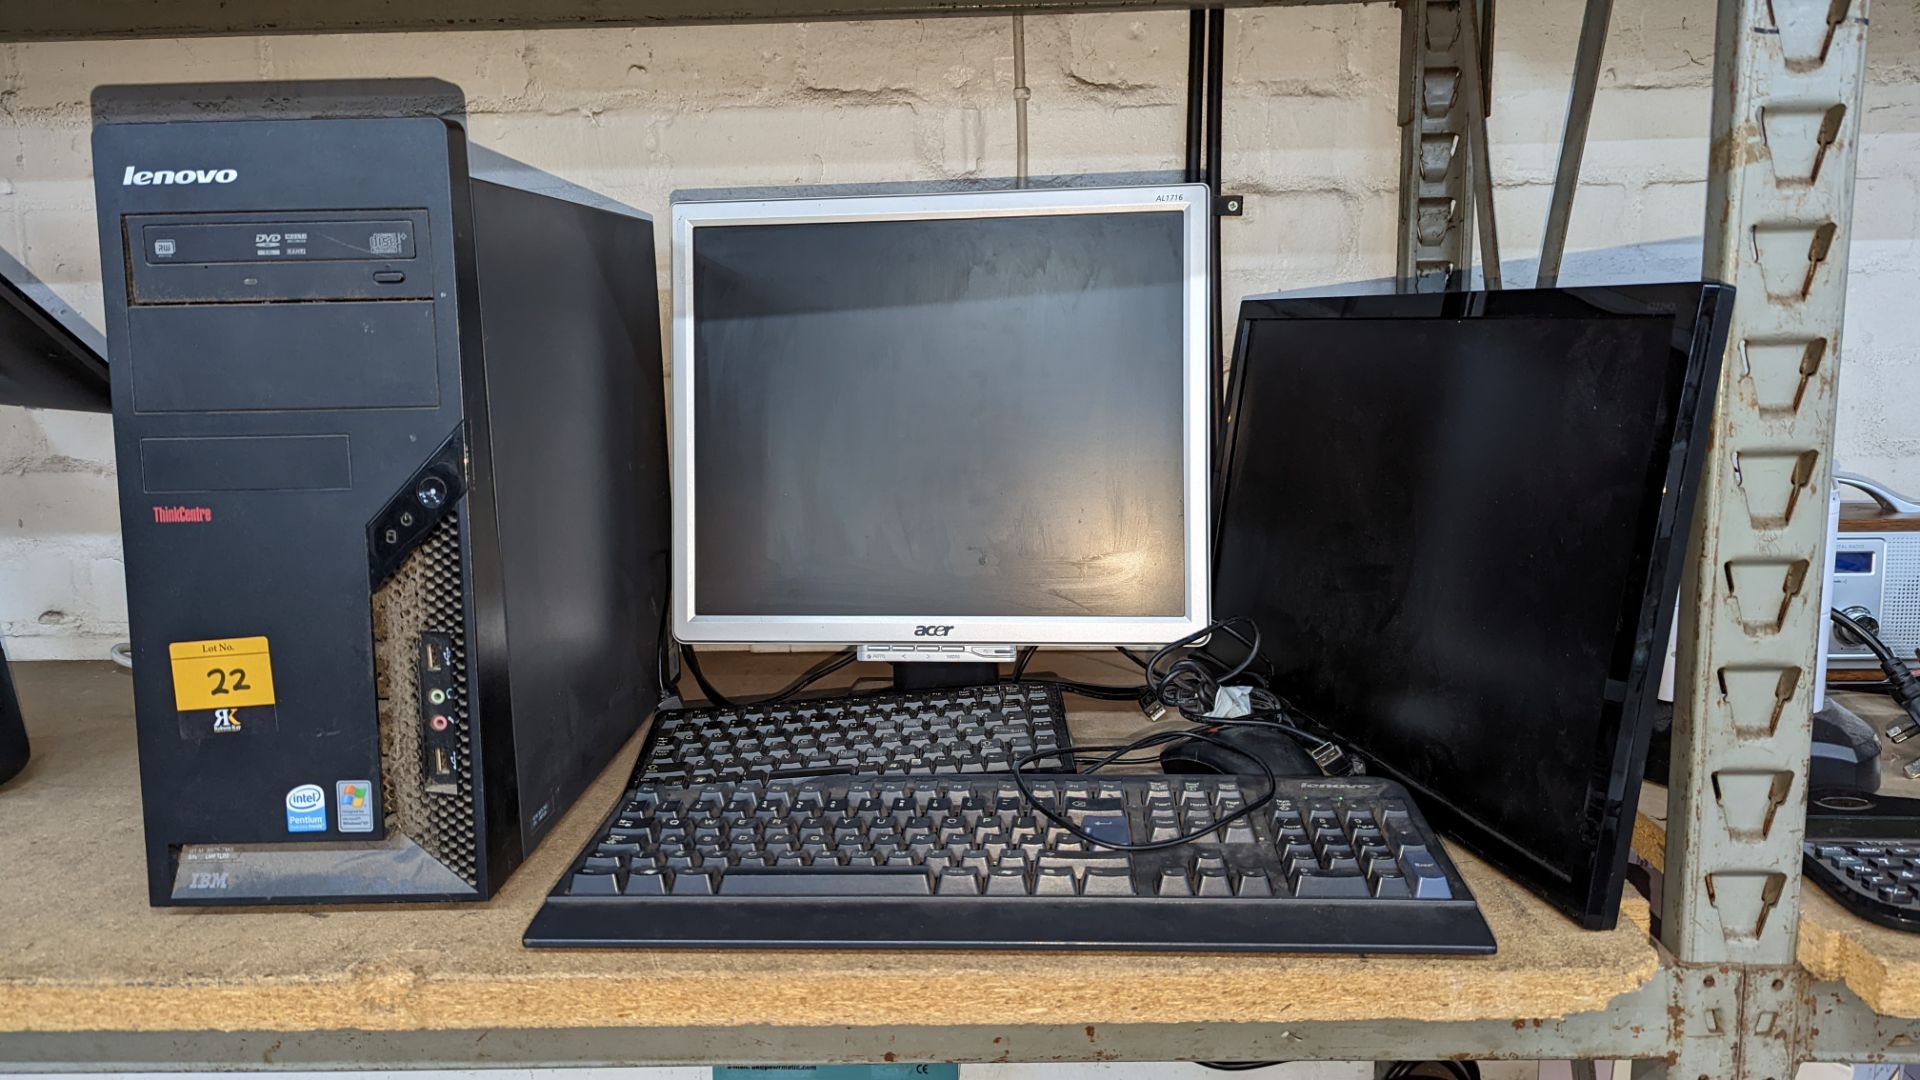 Lenovo ThinkCentre dual core Pentium computer including 2 monitors, 2 keyboards plus mouse